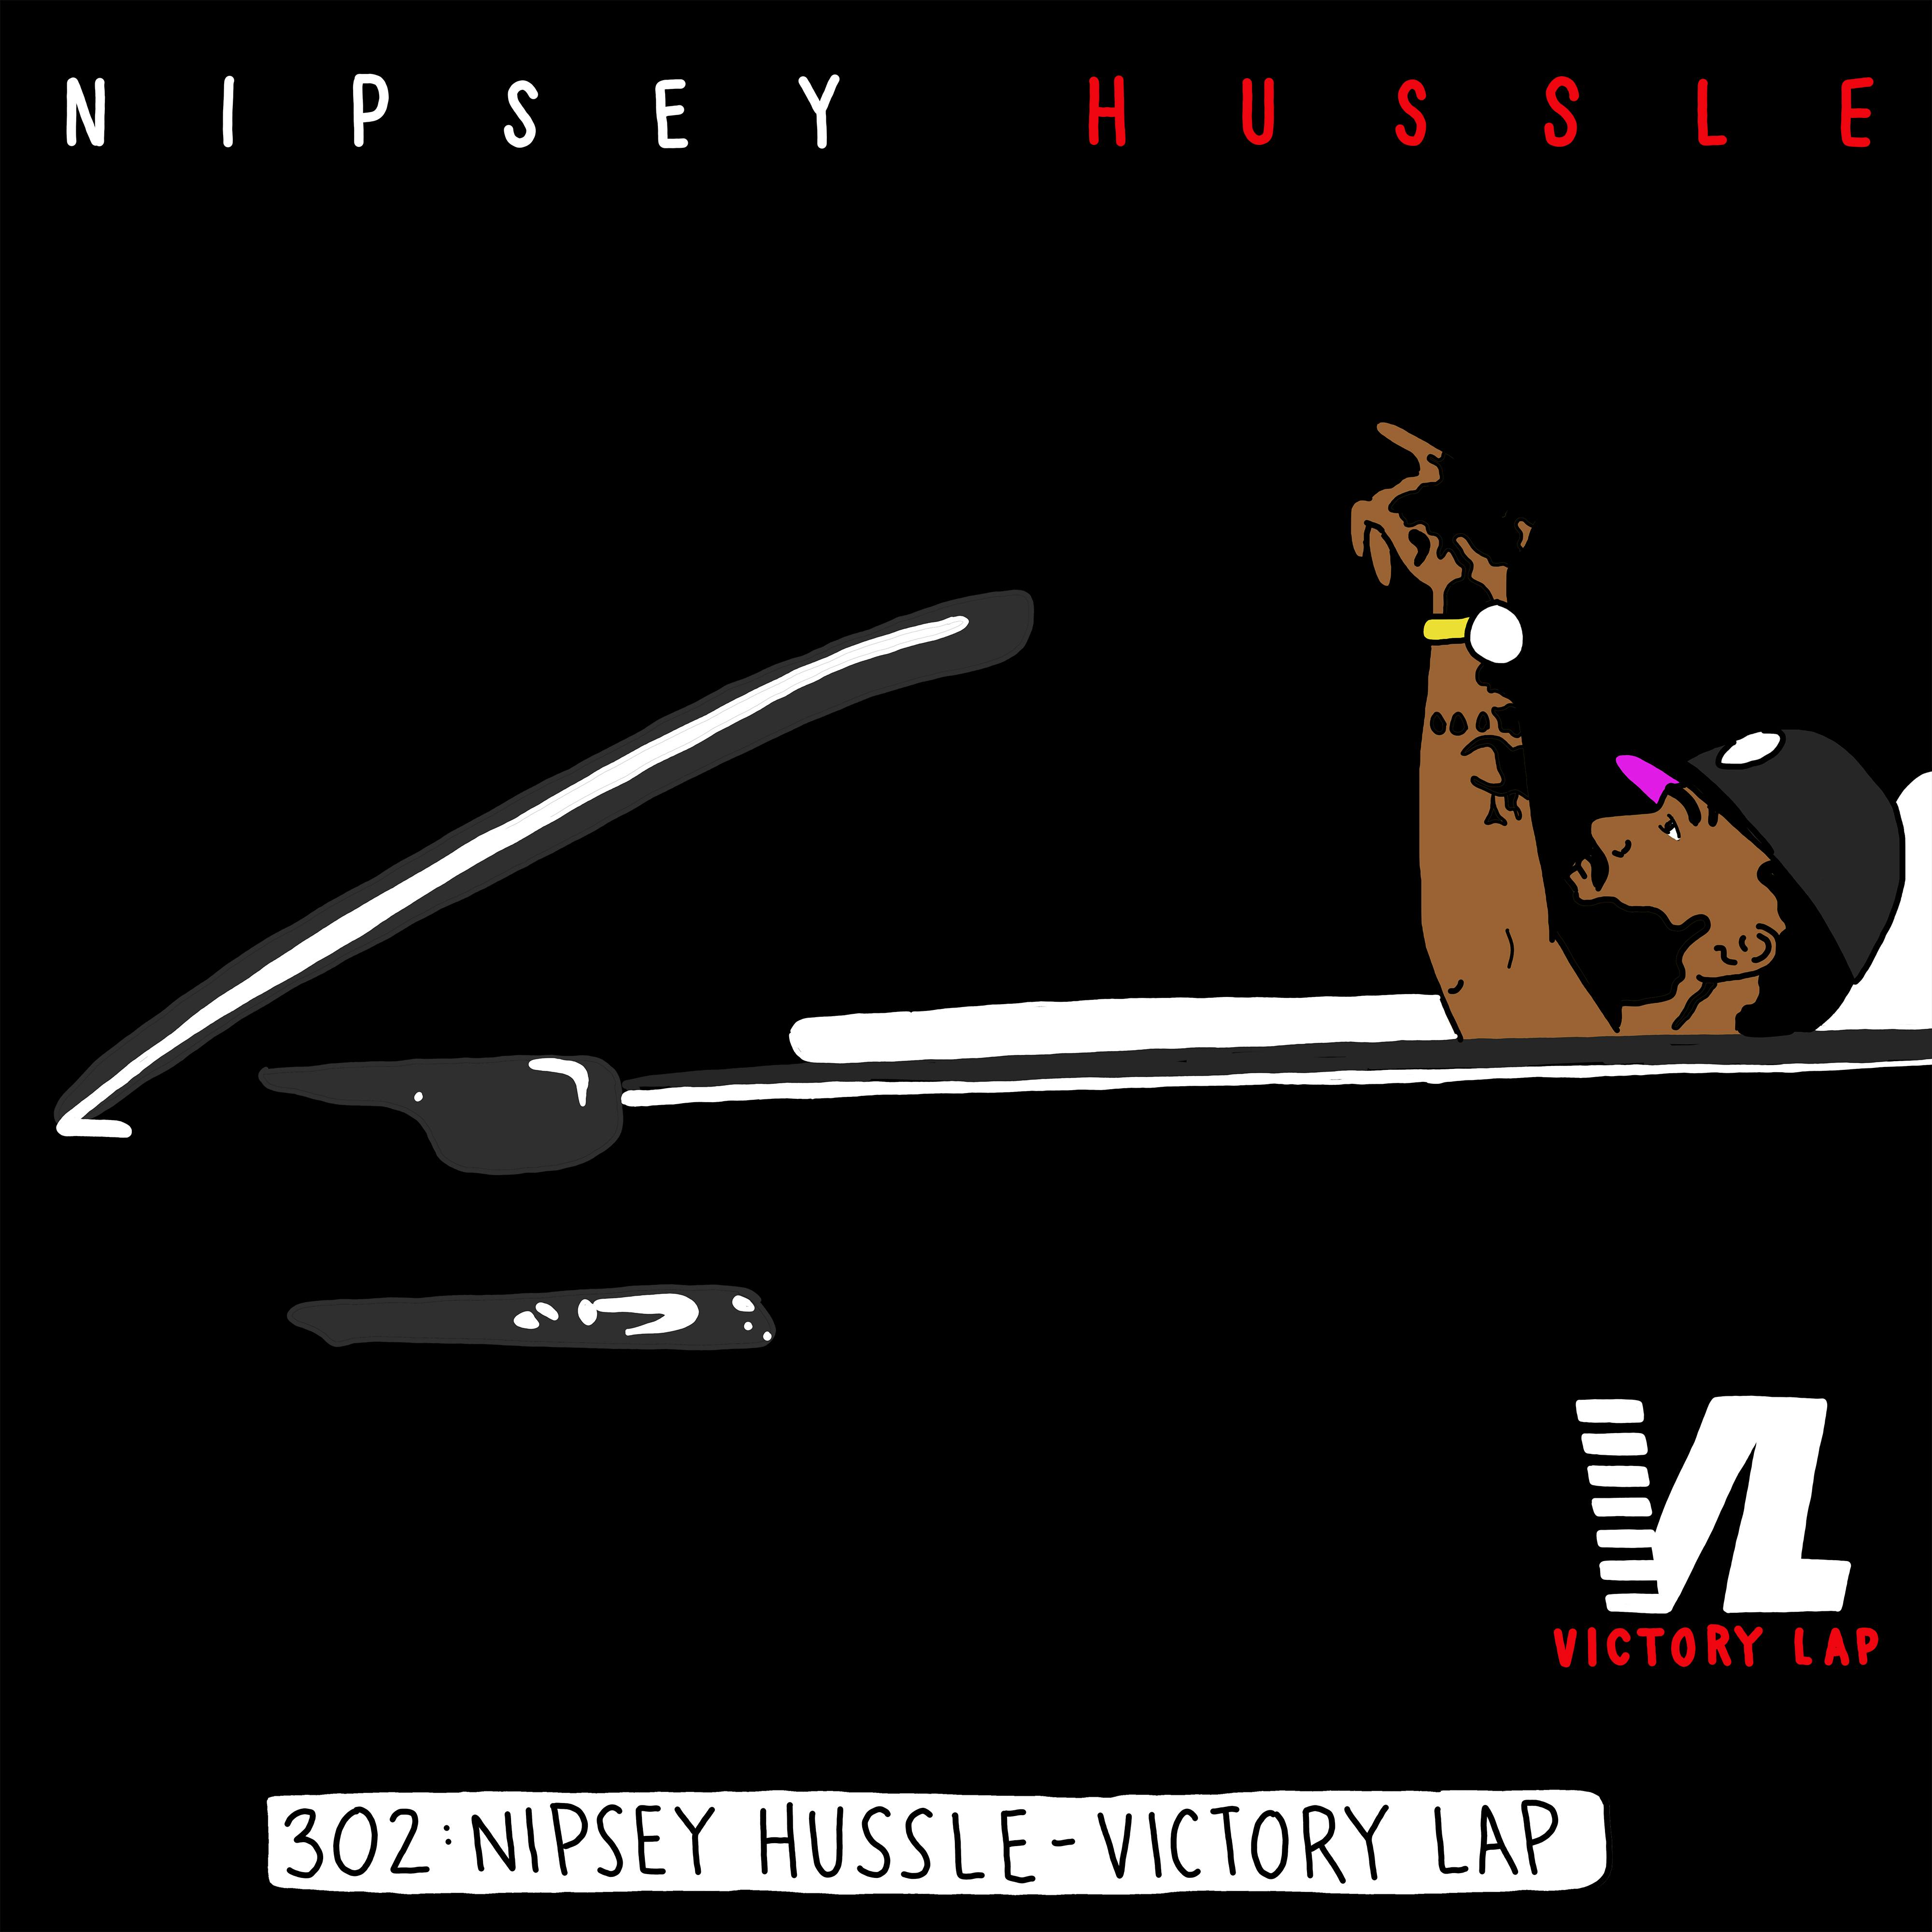 Five years later, the legacy of Nipsey Hussle’s ”Victory Lap”